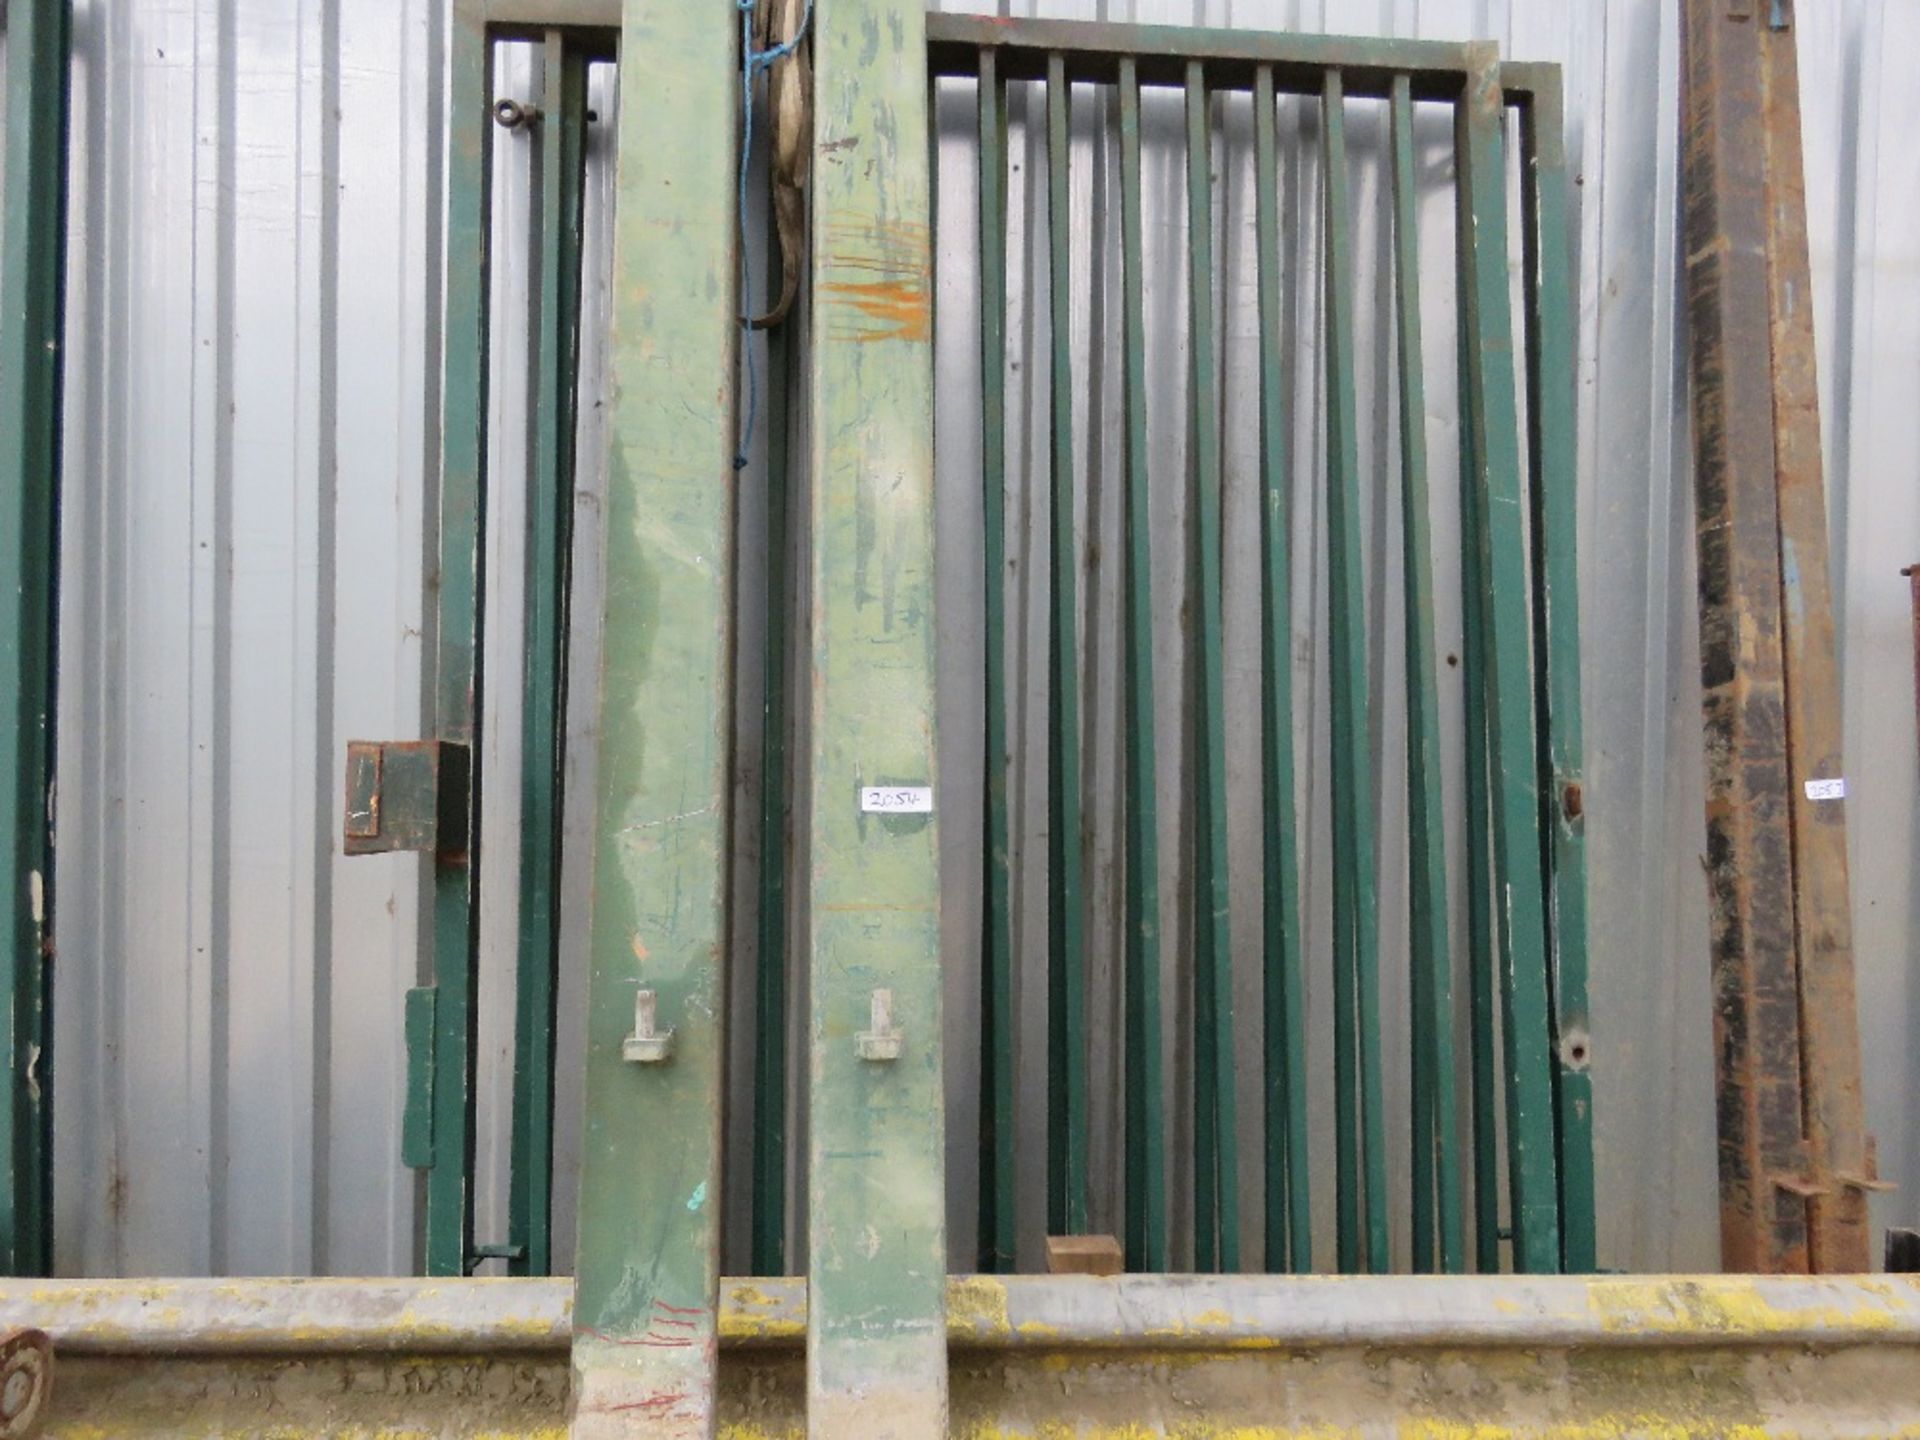 PAIR OF HIGH SECURITY HEAVY DUTY GREEN SITE GATES WITH POSTS, 12FT TOTAL SPAN APPROX. LOT LOCATION